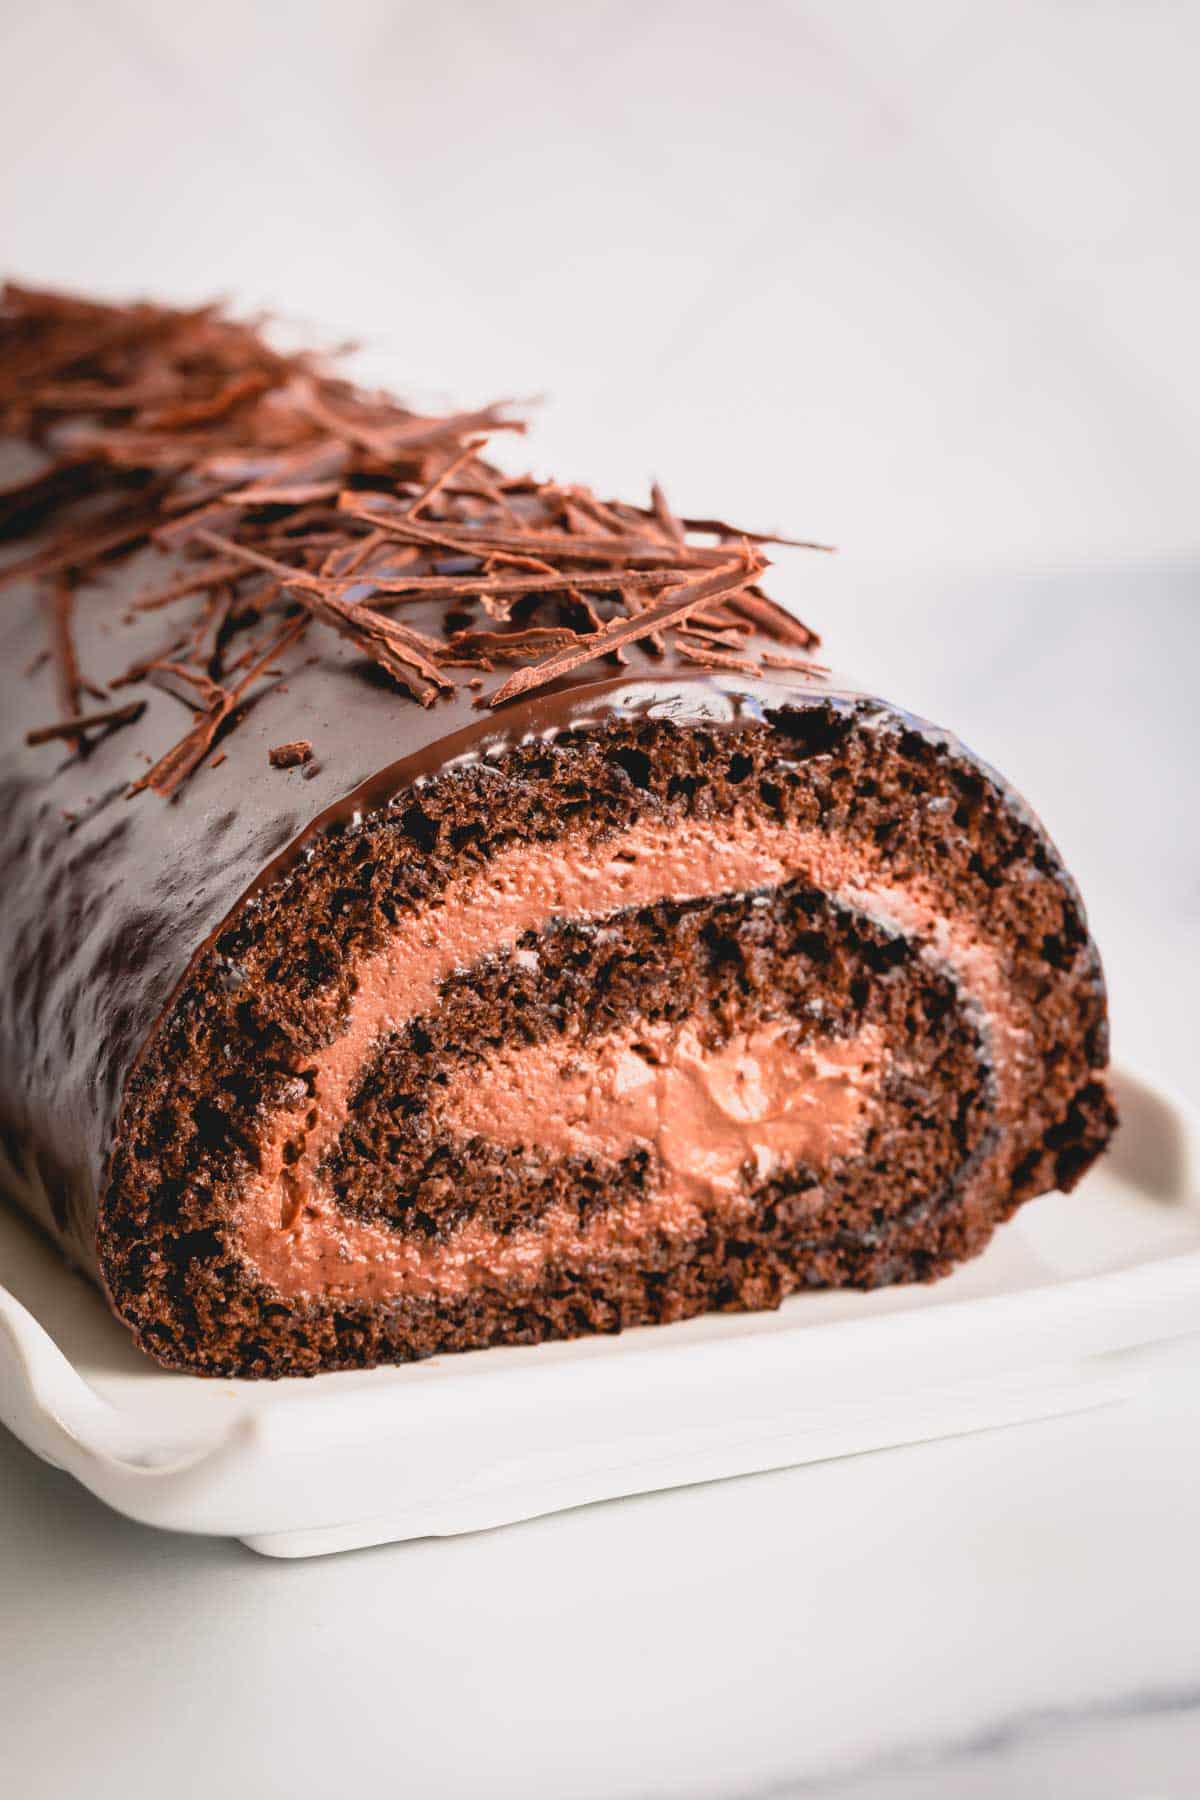 Chocolate Swiss Roll with Cream Filling